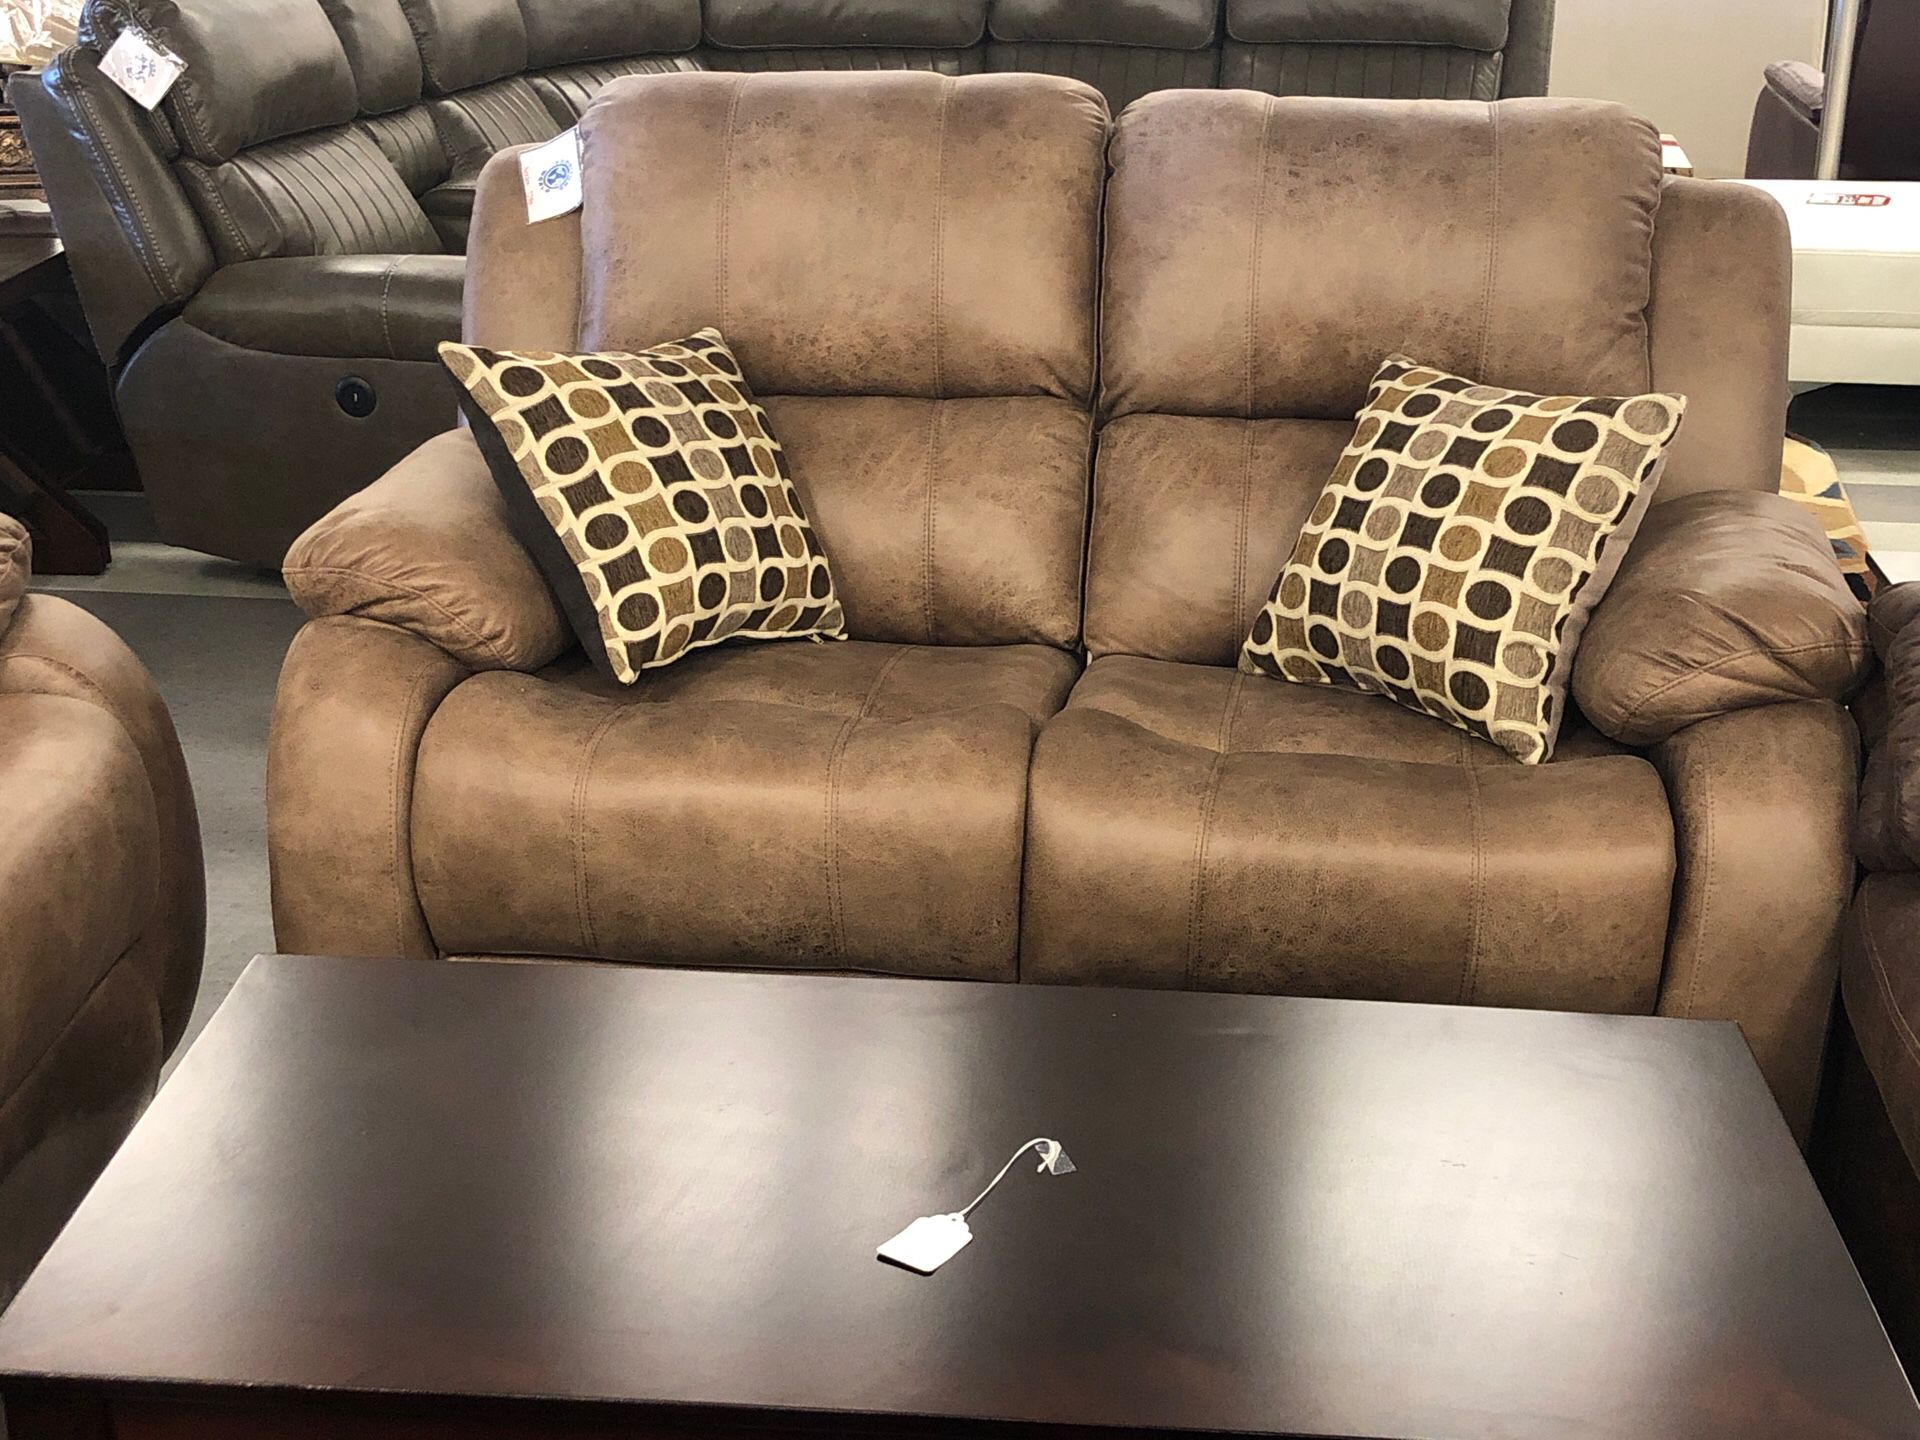 Huge blowout sale up to 80% off furniture market items in store only